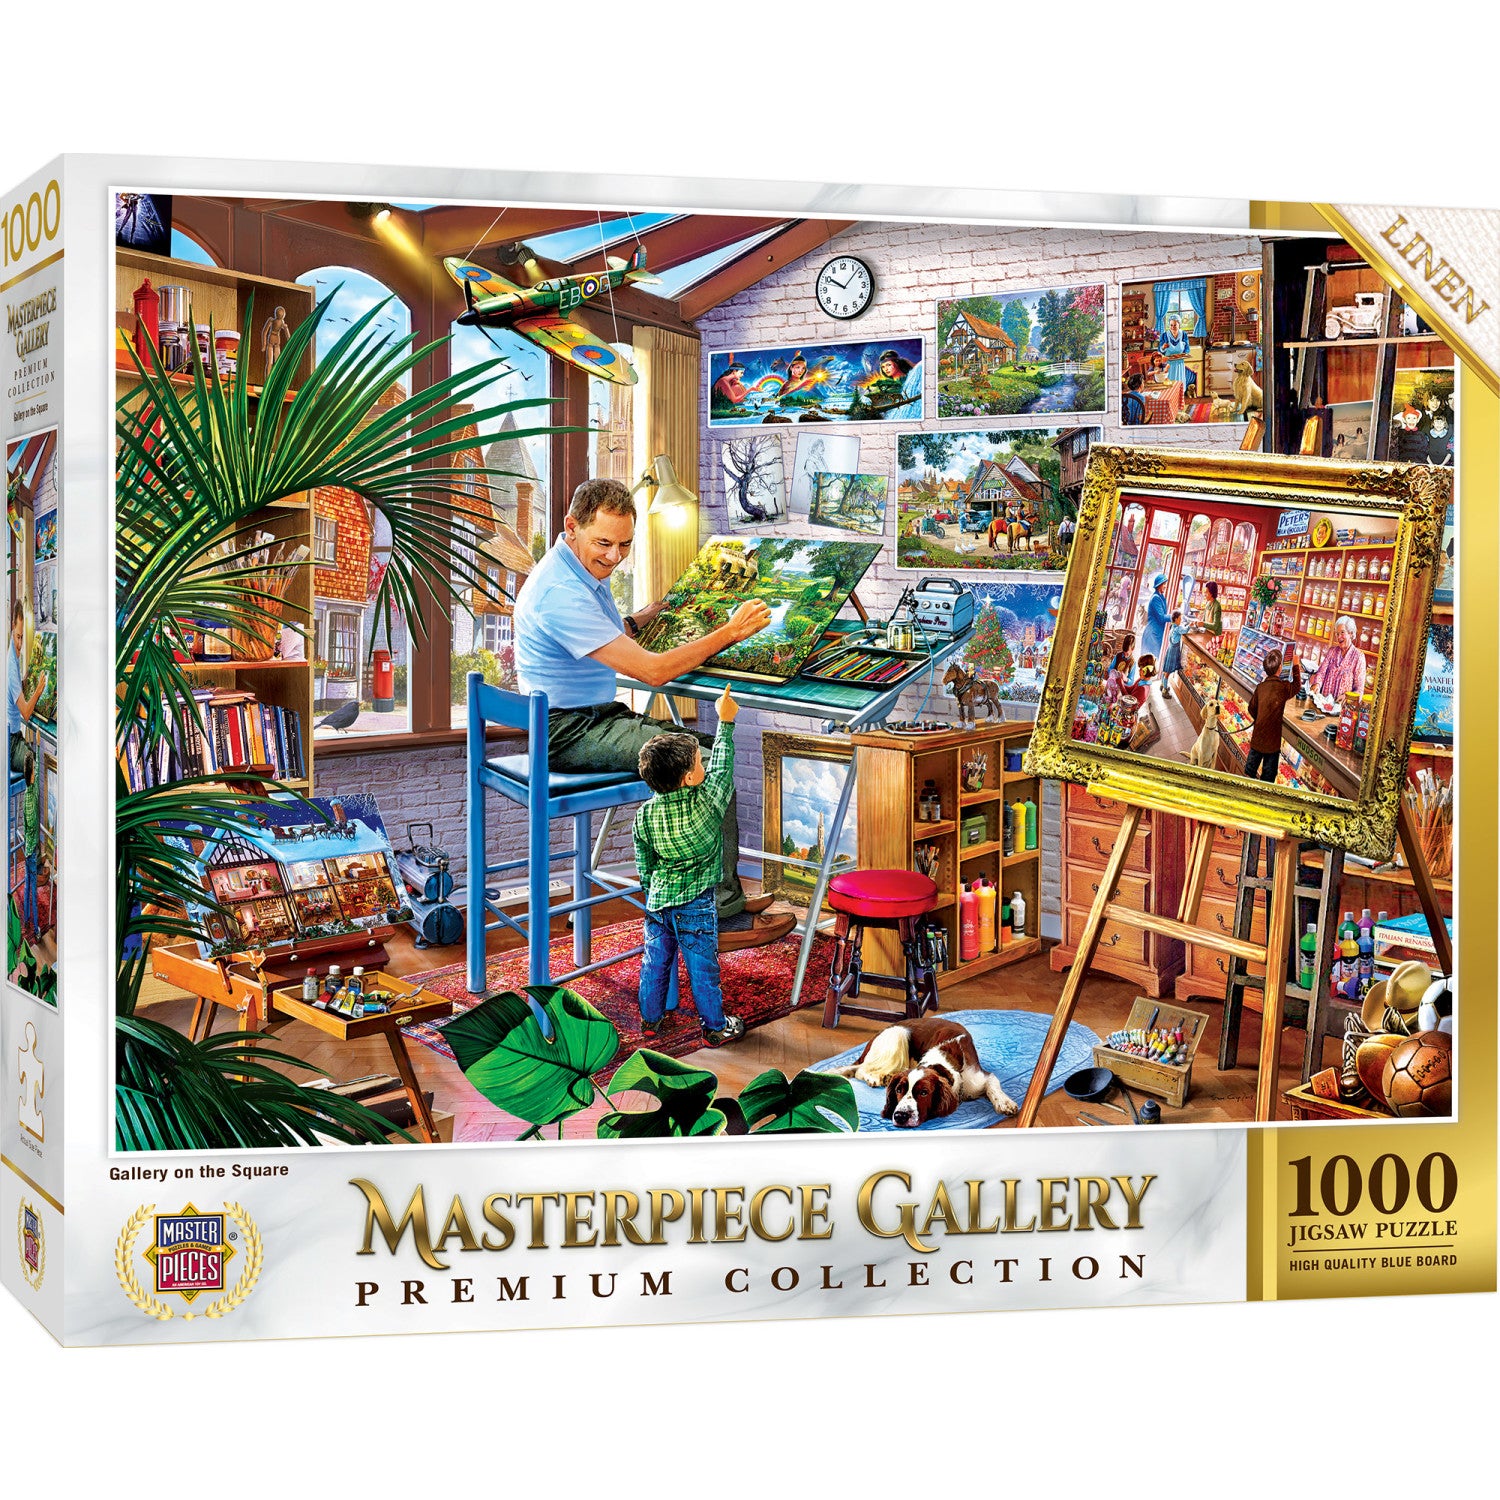 MasterPieces Inc MasterPieces Jigsaw Puzzle Glue Sheets | Set of 12